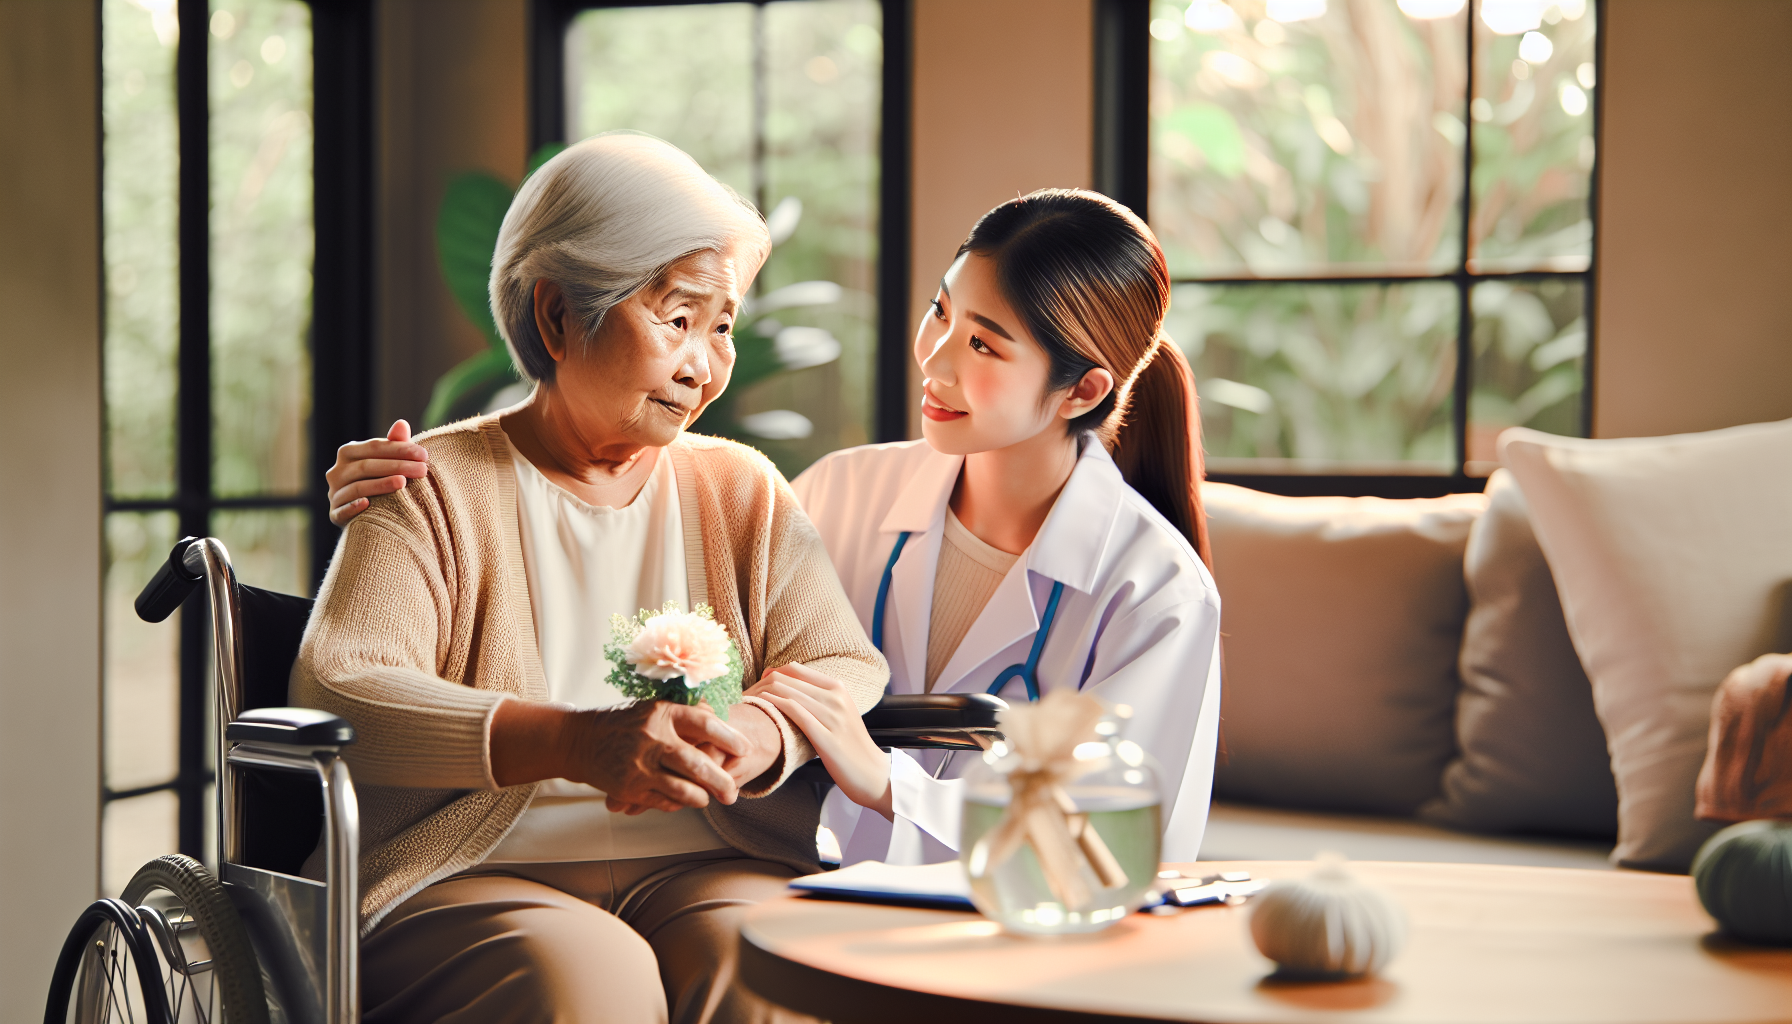 What Kind Of Care Does An Elderly Client Need?